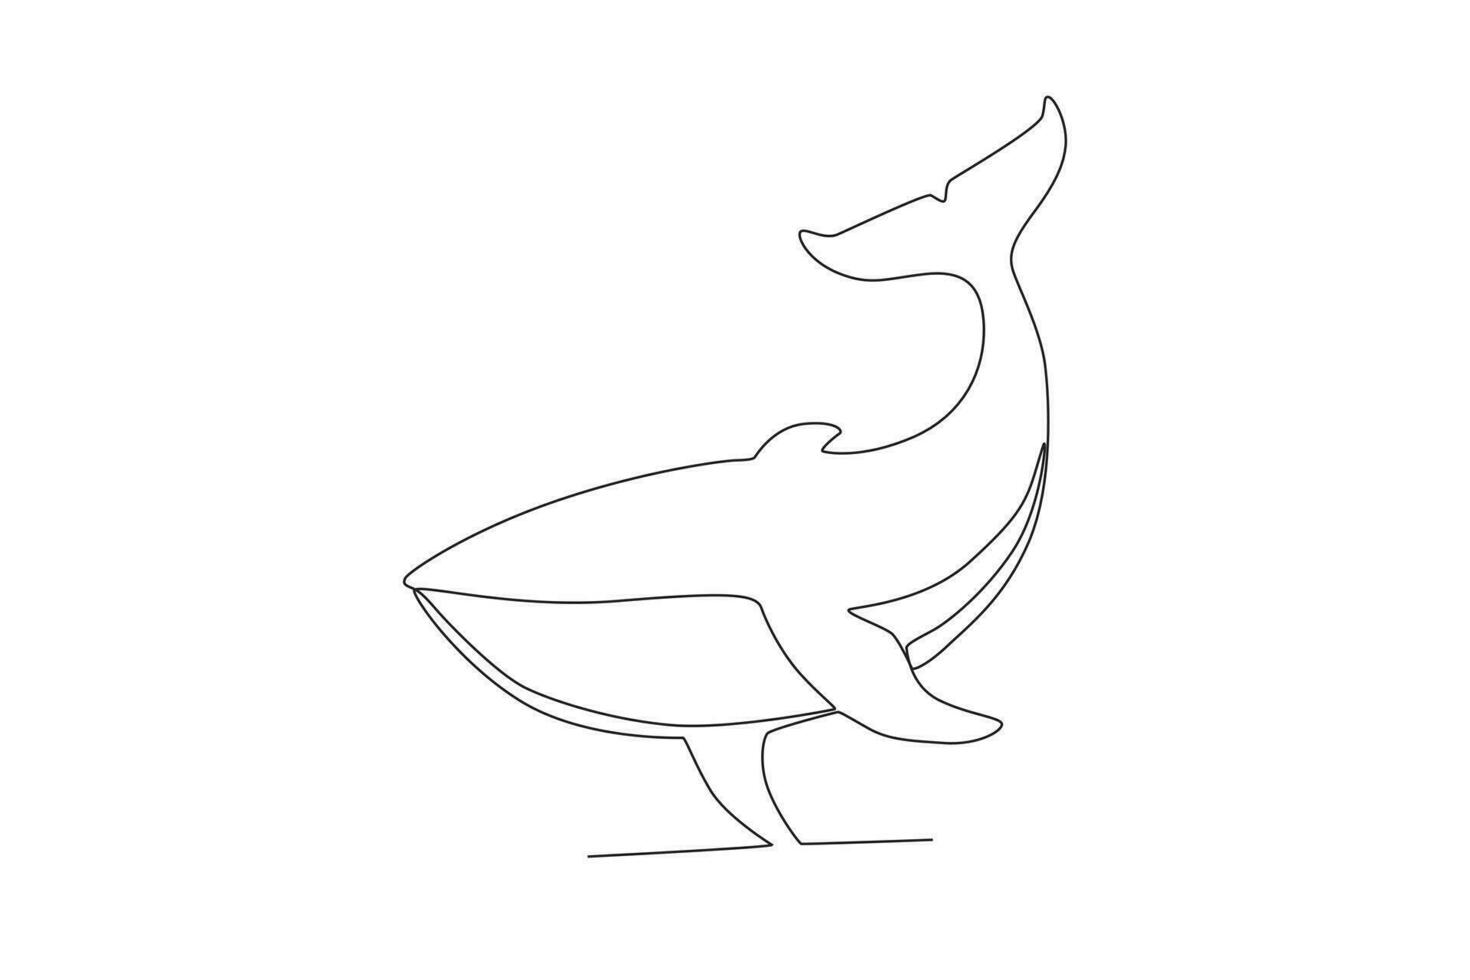 Single one line drawing of a whale. Continuous line draw design graphic vector illustration.